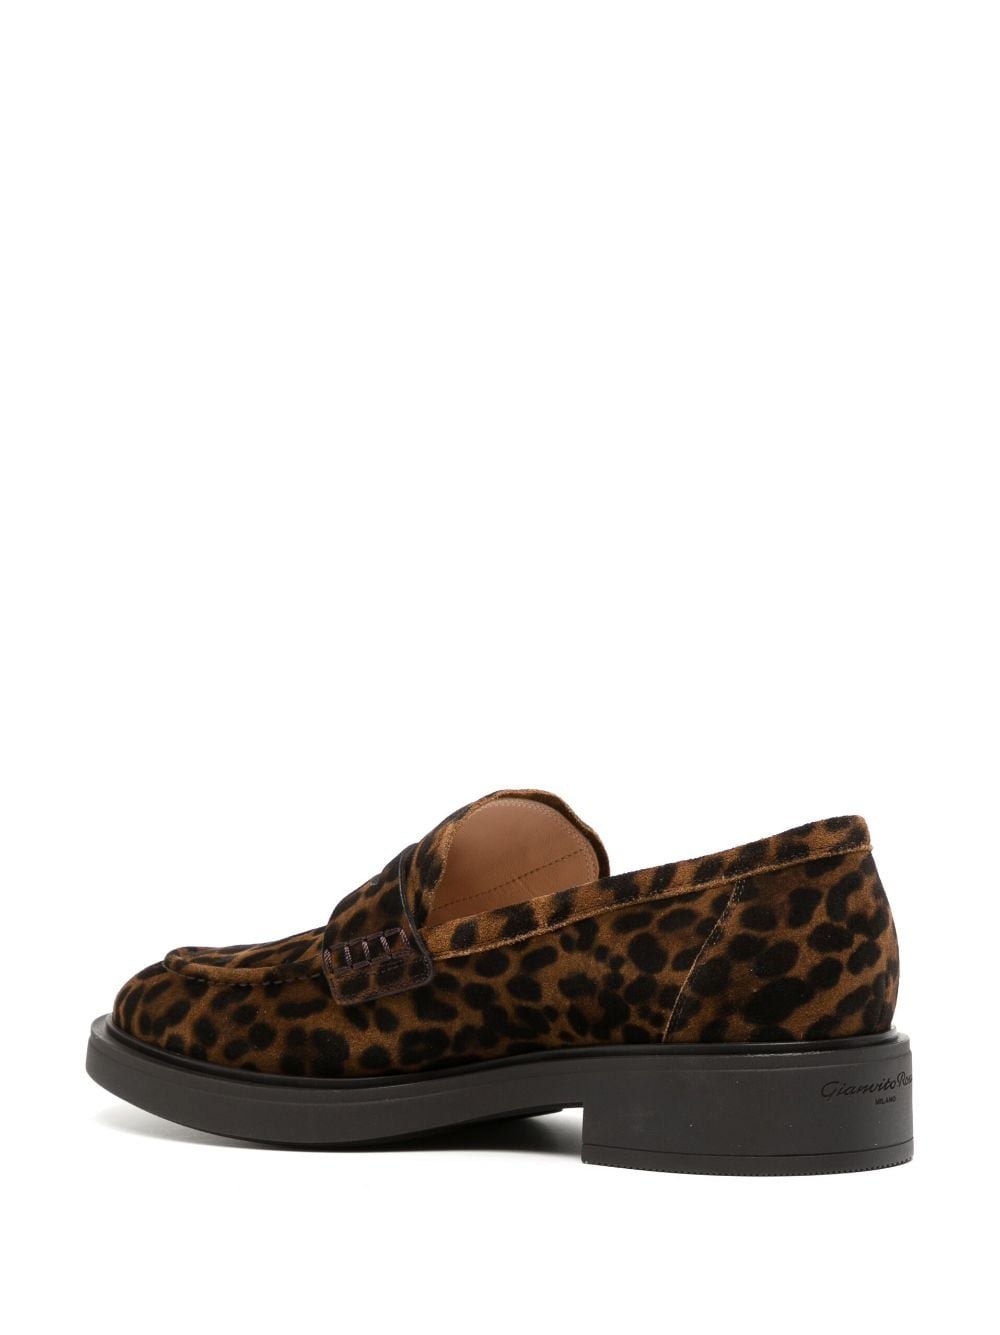 leopard-print leather loafers - 3